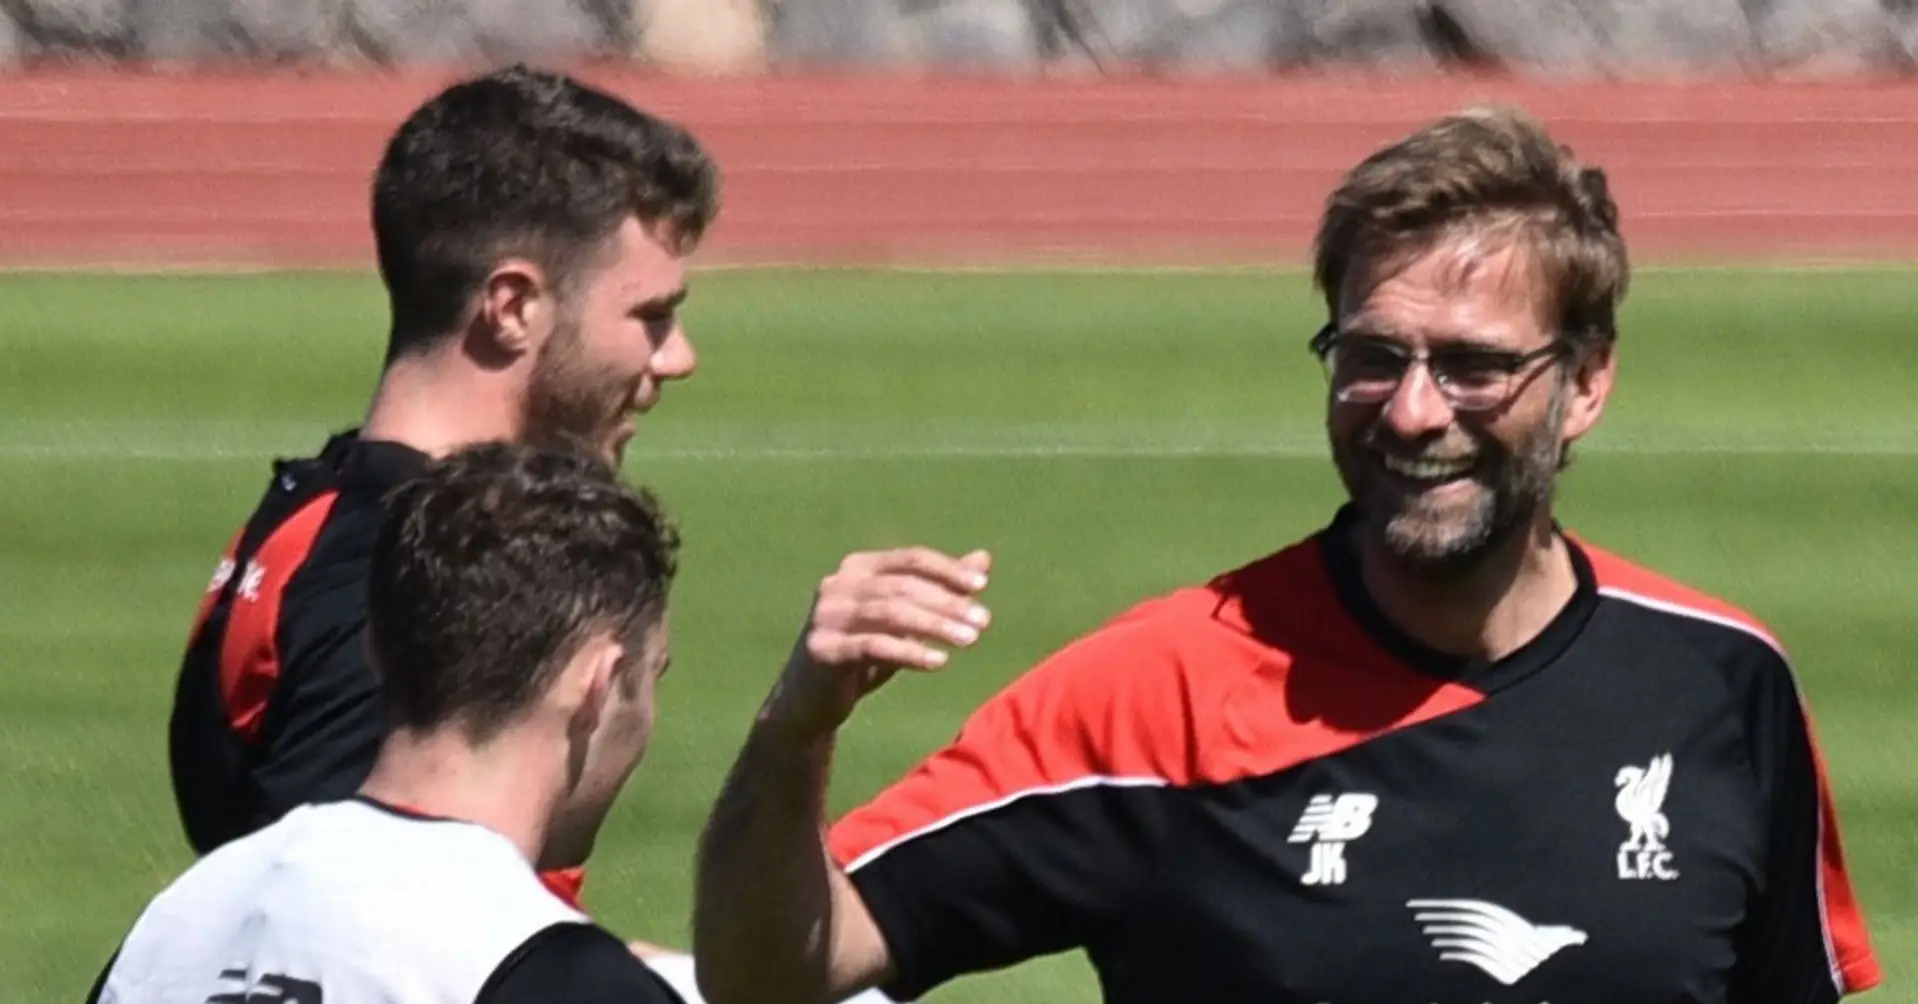 Masterclass from Jurgen Klopp on how to build group relationship: Throwback to Liverpool's training camp in Tenerife